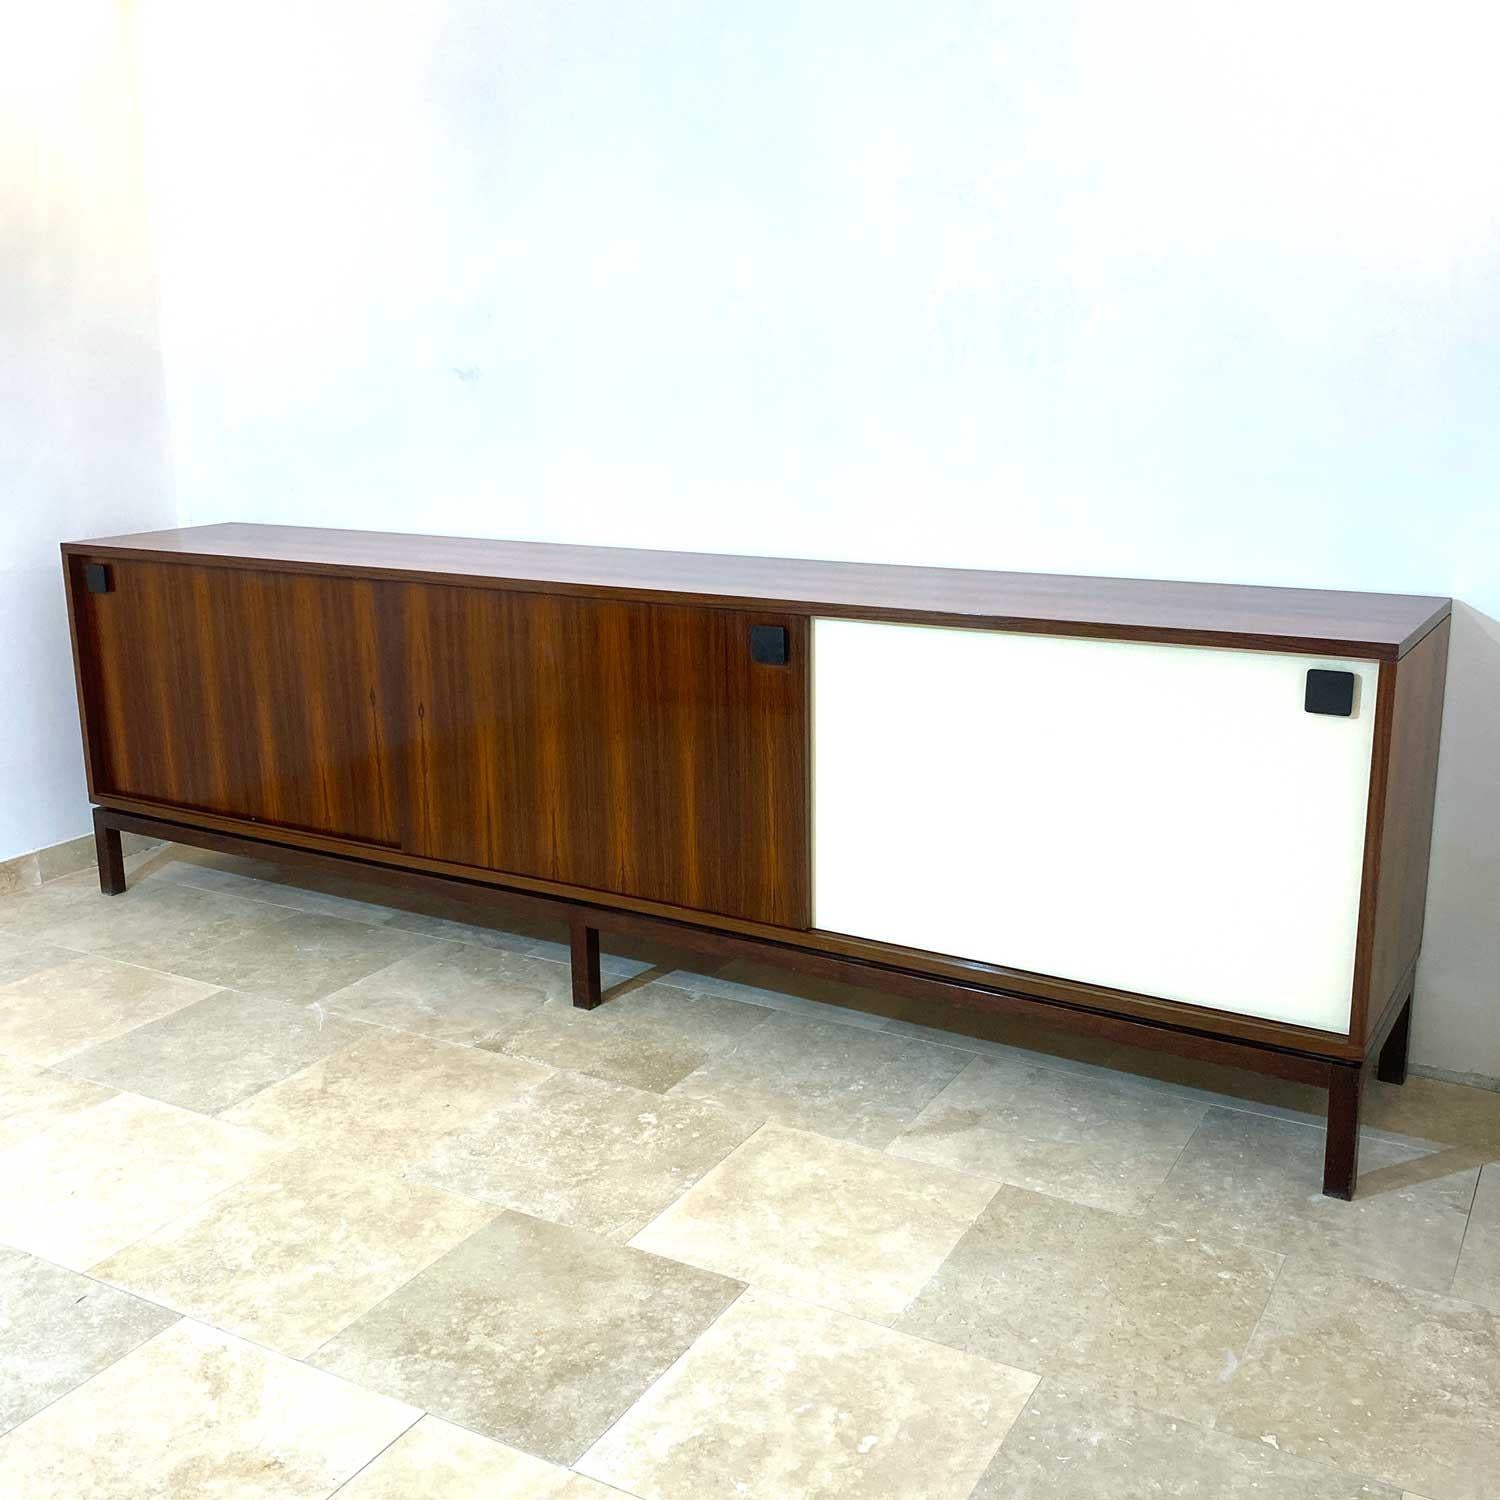 Wonderfull  sideboard by Tito Agnoli for La Linea furniture Italy. Three sliding doors, one row of drawers. Perfect used condition
A series of drawers complete the interior of the piece of furniture like a real silver cabinet. 
Possibility of moving